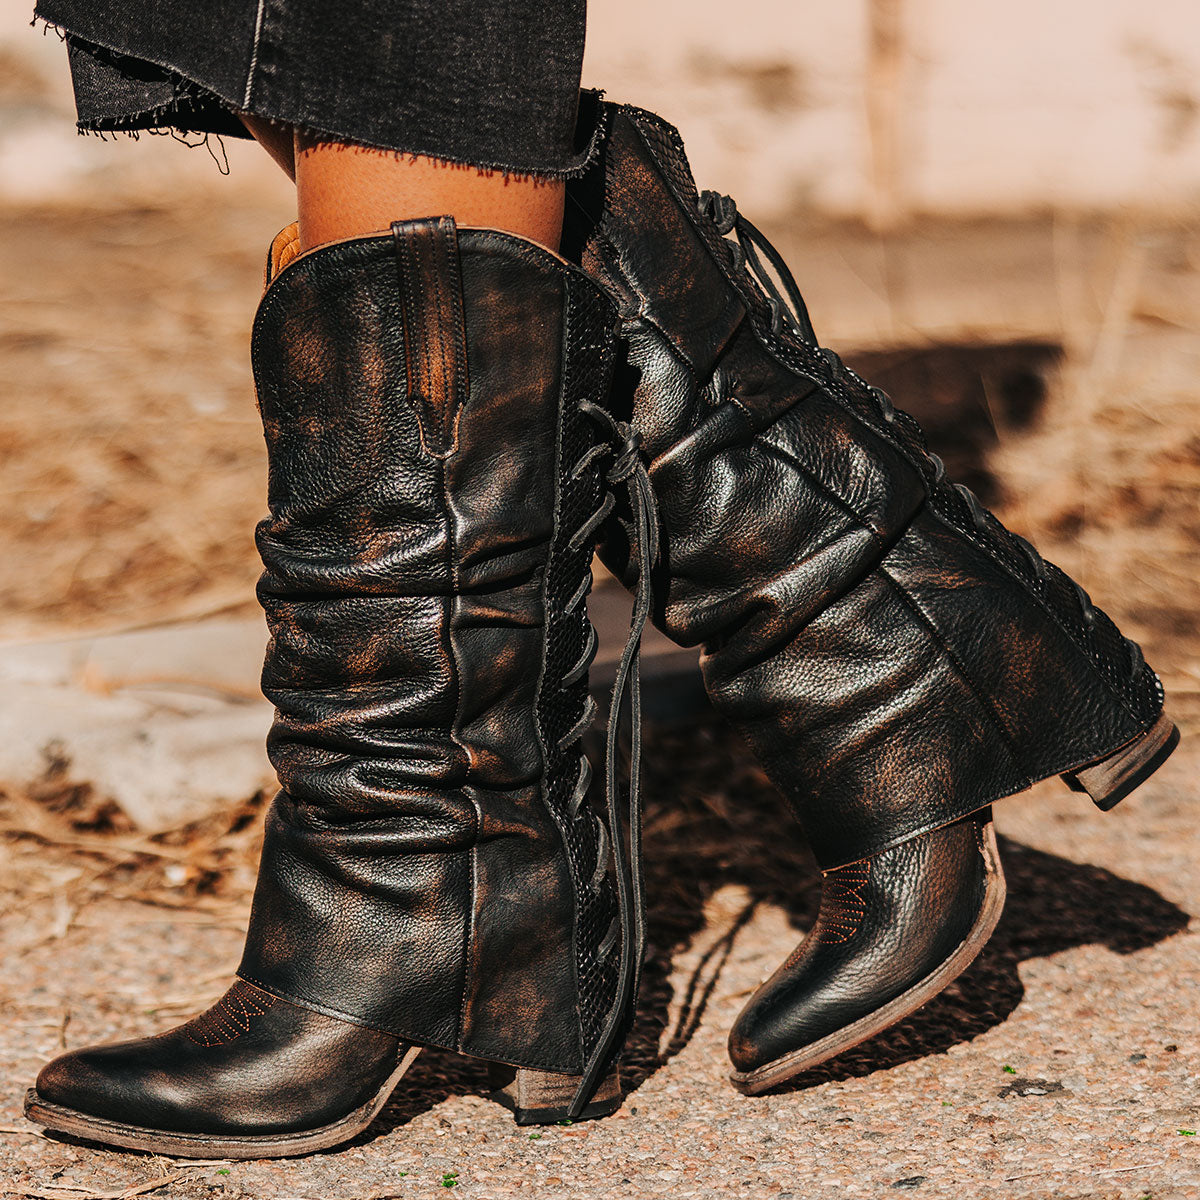 FREEBIRD women's Jules black leather high flare heel western boot with stitch detailing and back lacing